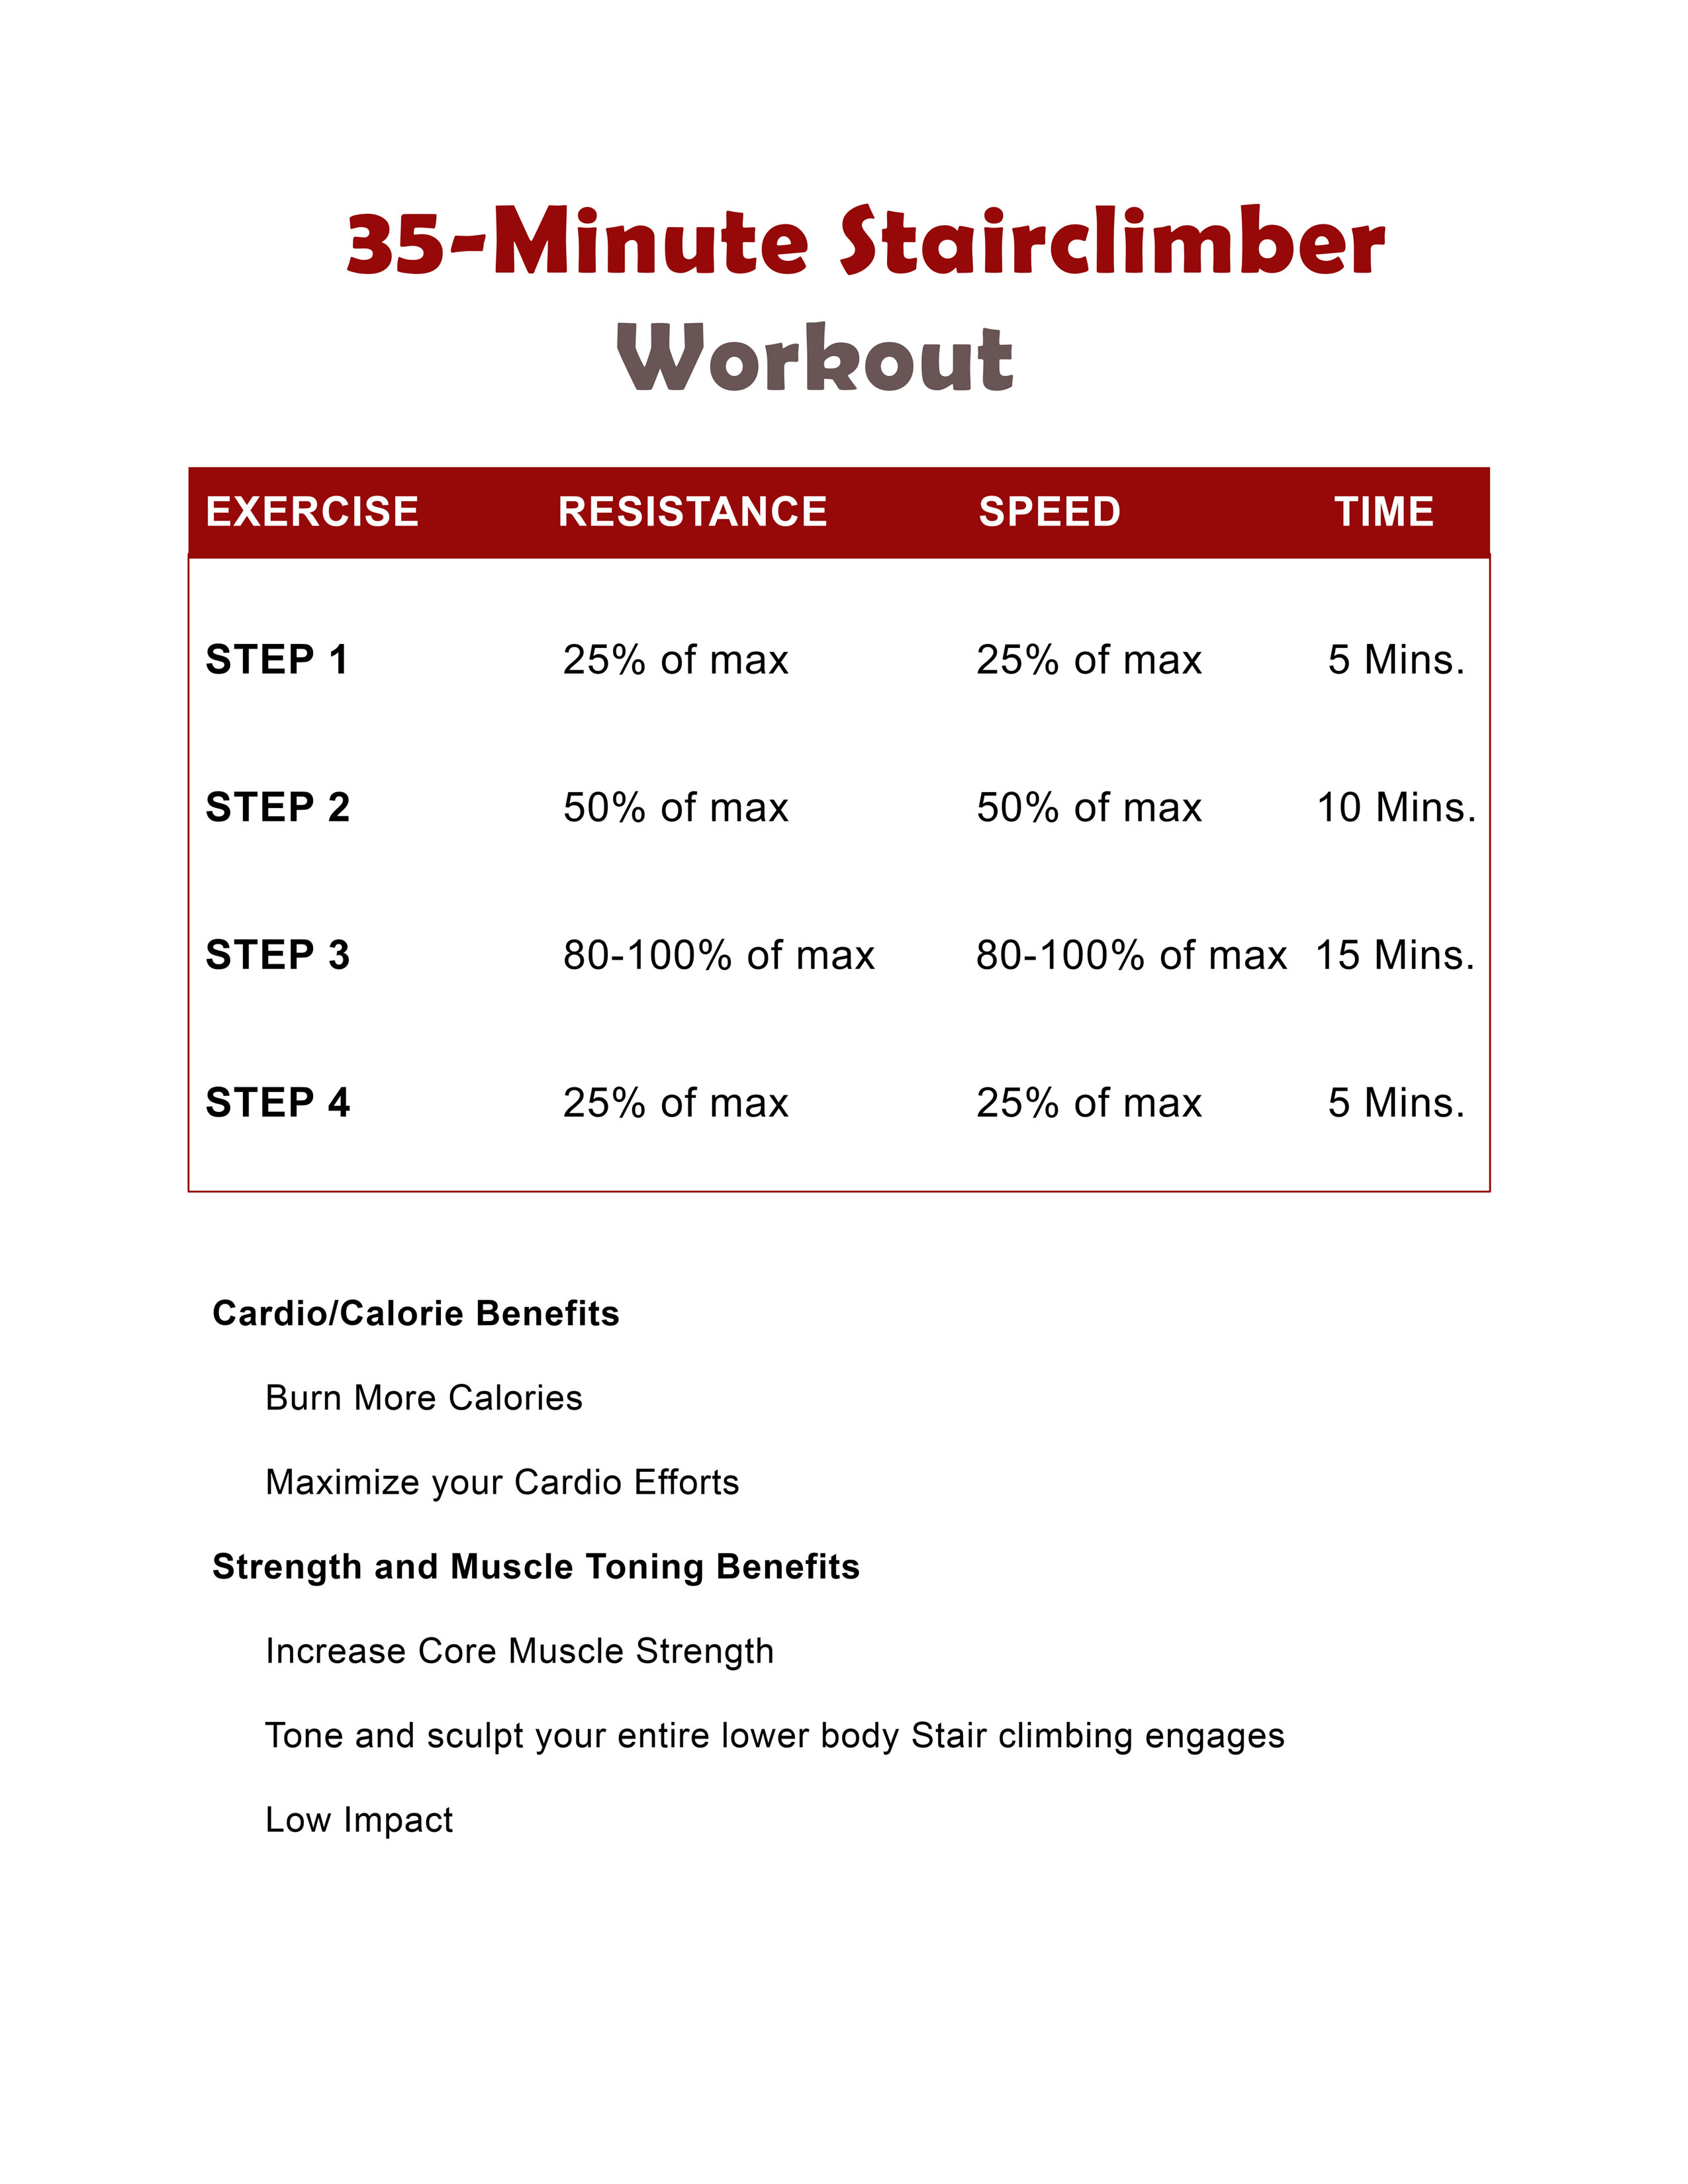 35 minute stairclimber workout you can download and print.